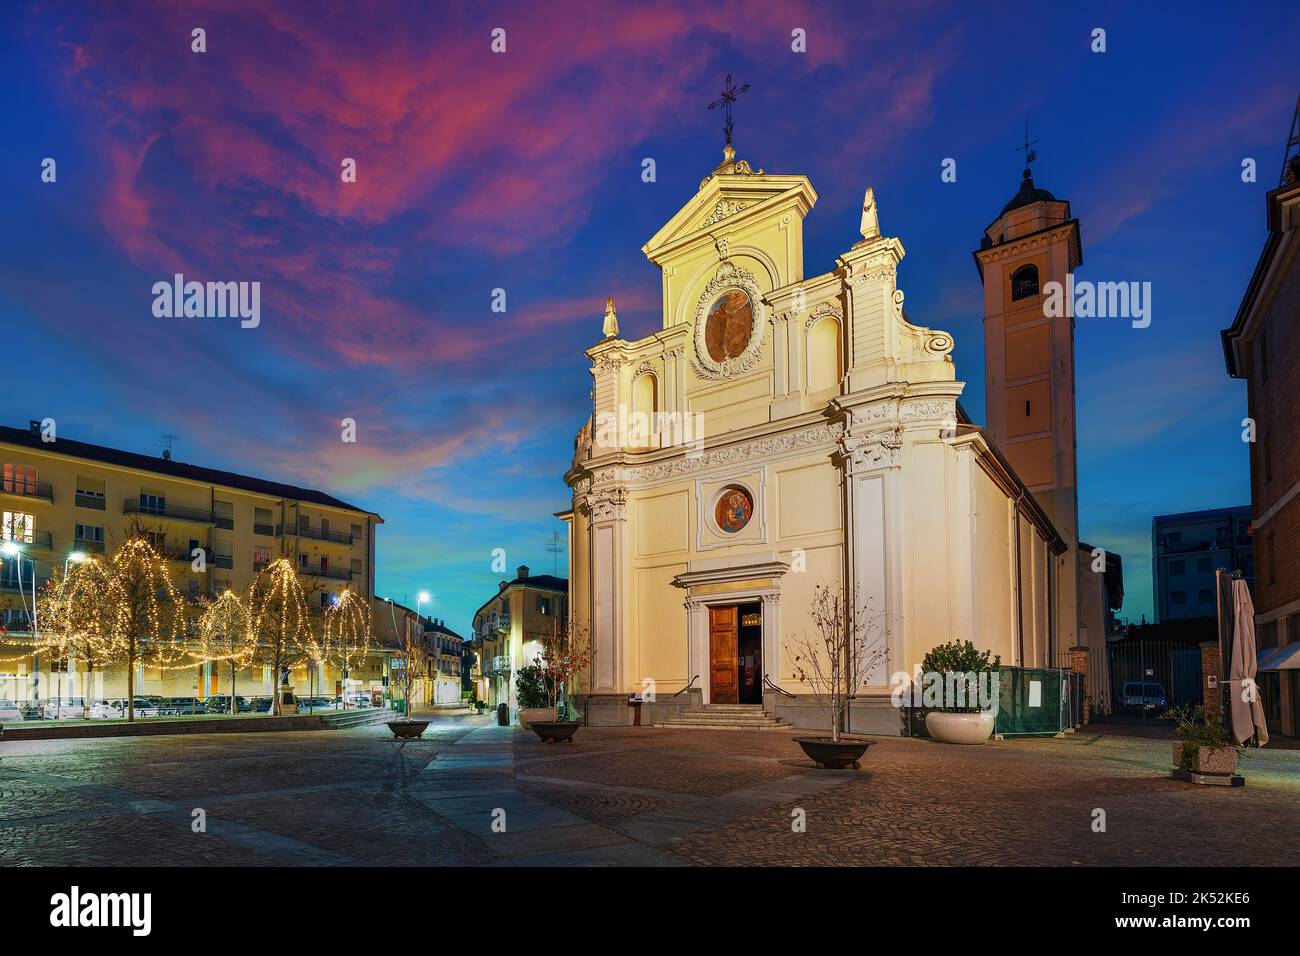 Catholic church on small town square illuminated with Christmas lights in the evening in Alba, Piedmont, Northern Italy. Stock Photo